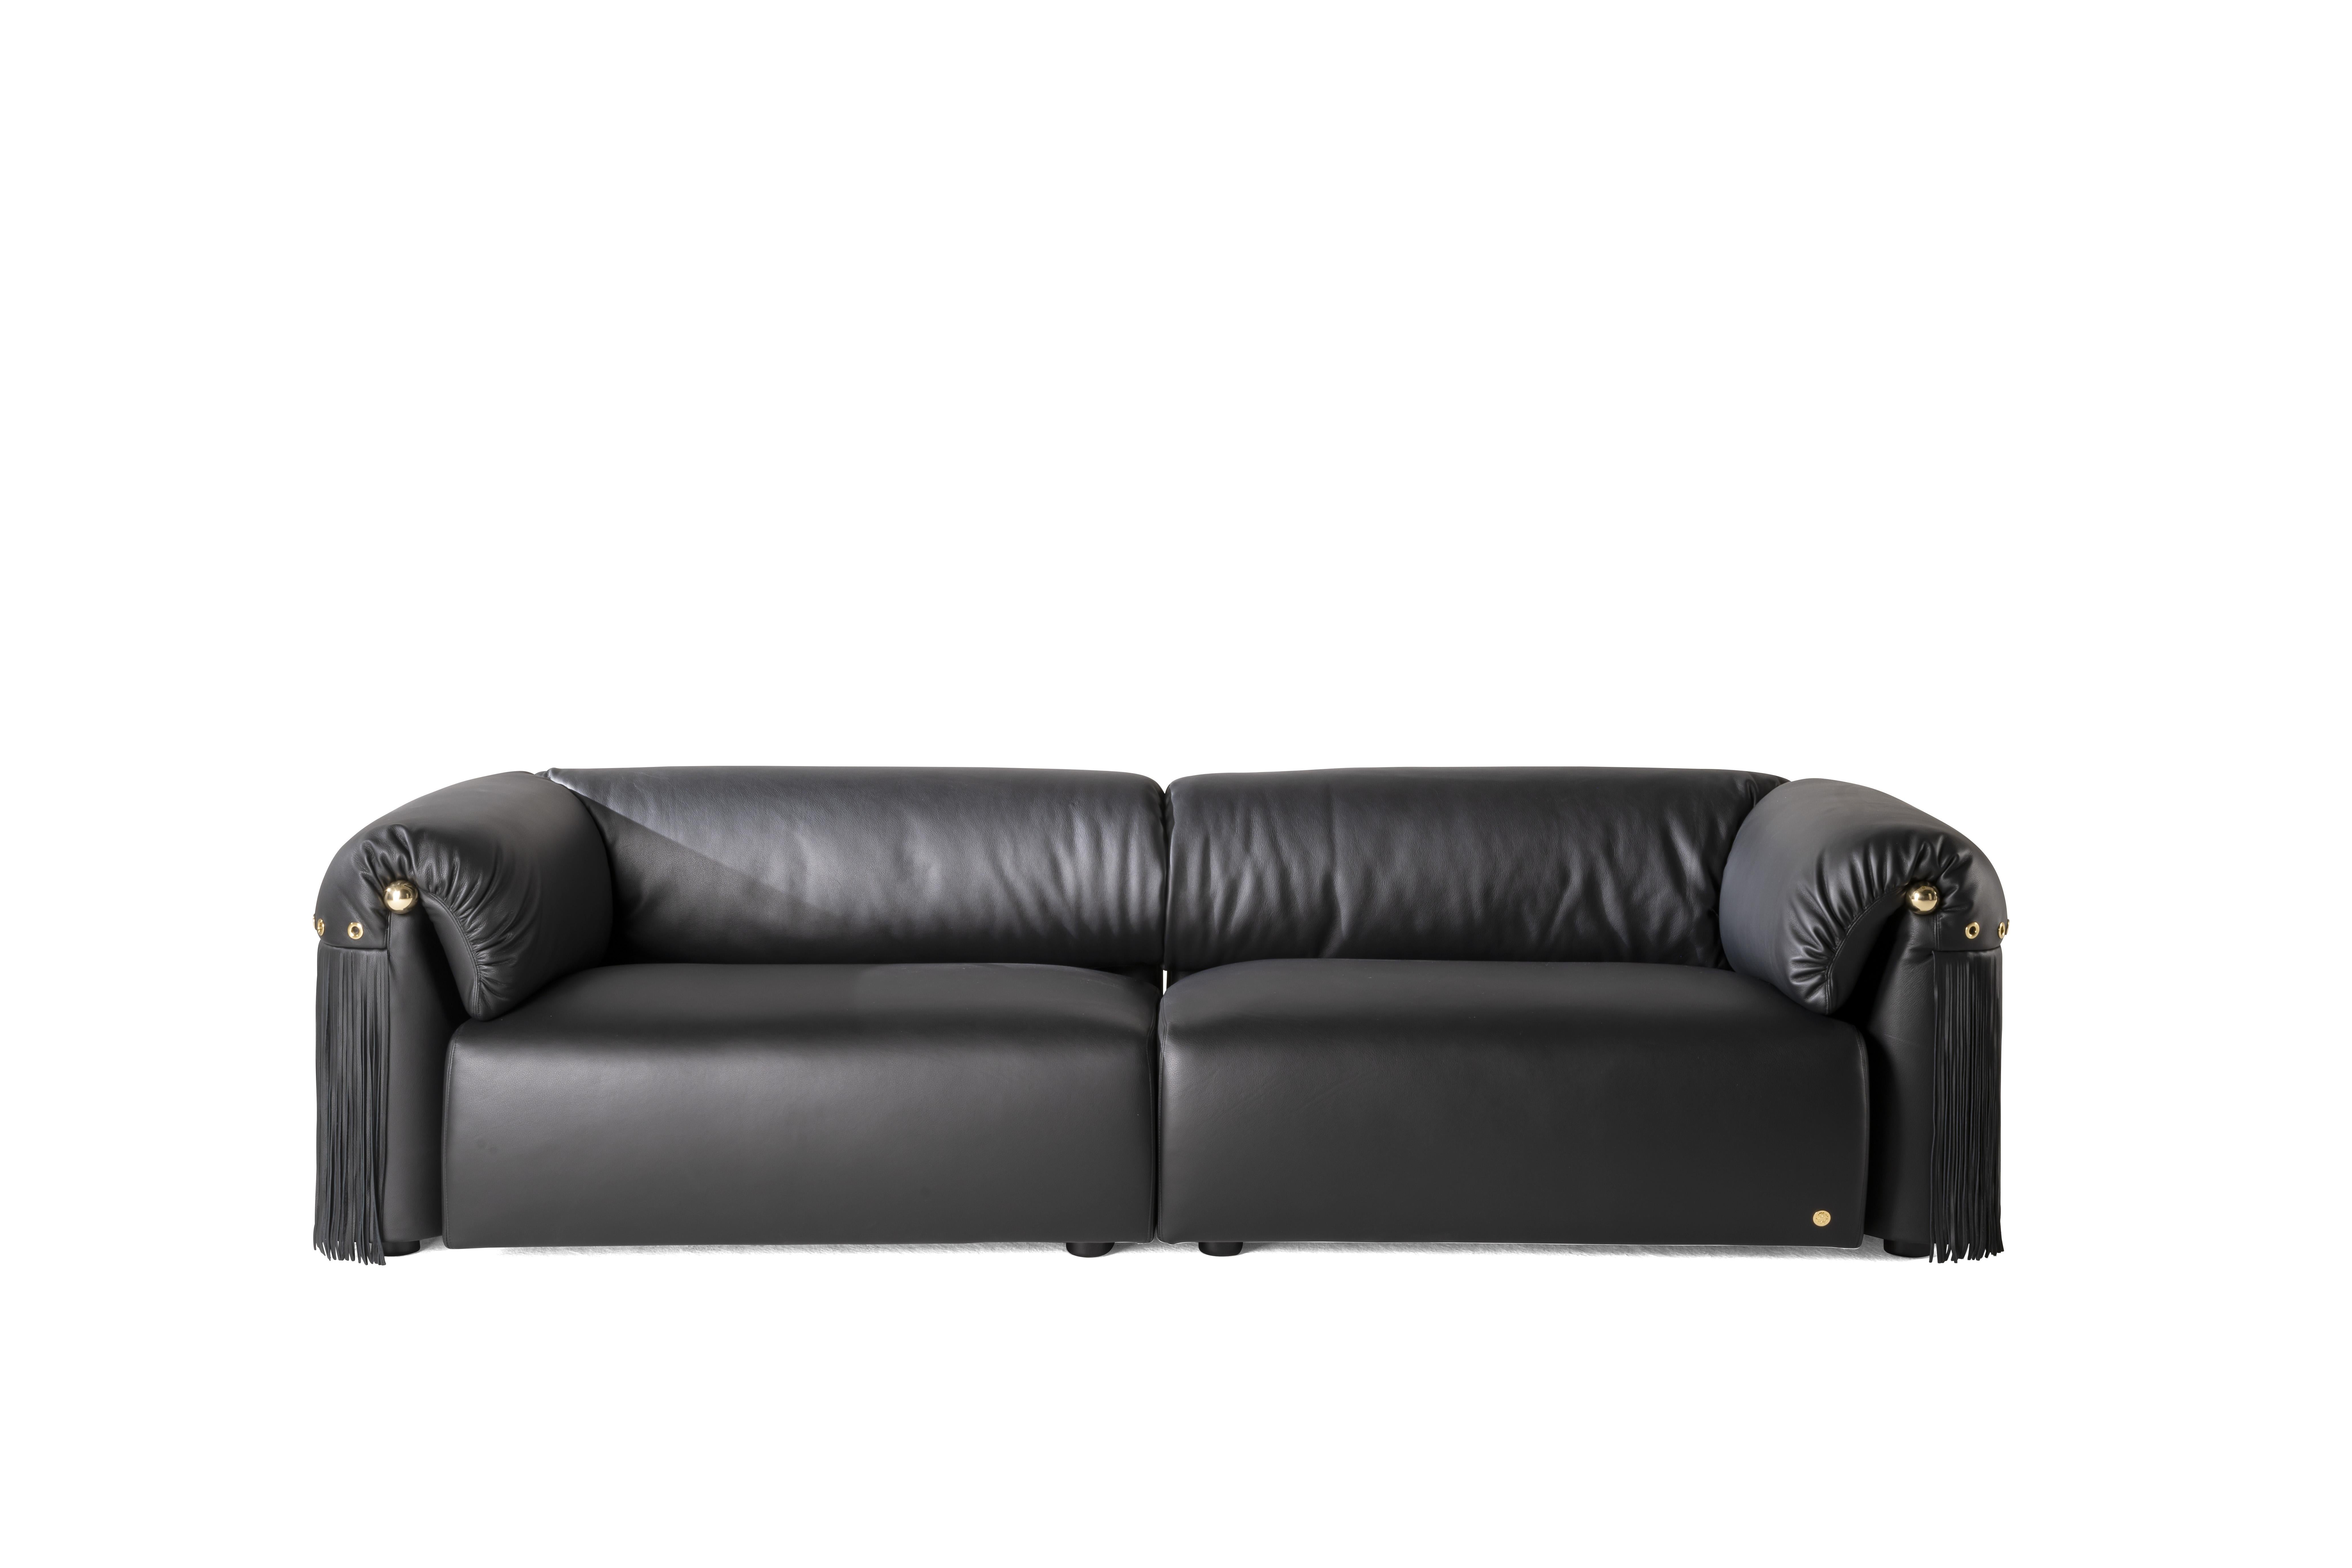 Italian 21st Century Malawi Sofa in Black Leather by Roberto Cavalli Home Interiors For Sale